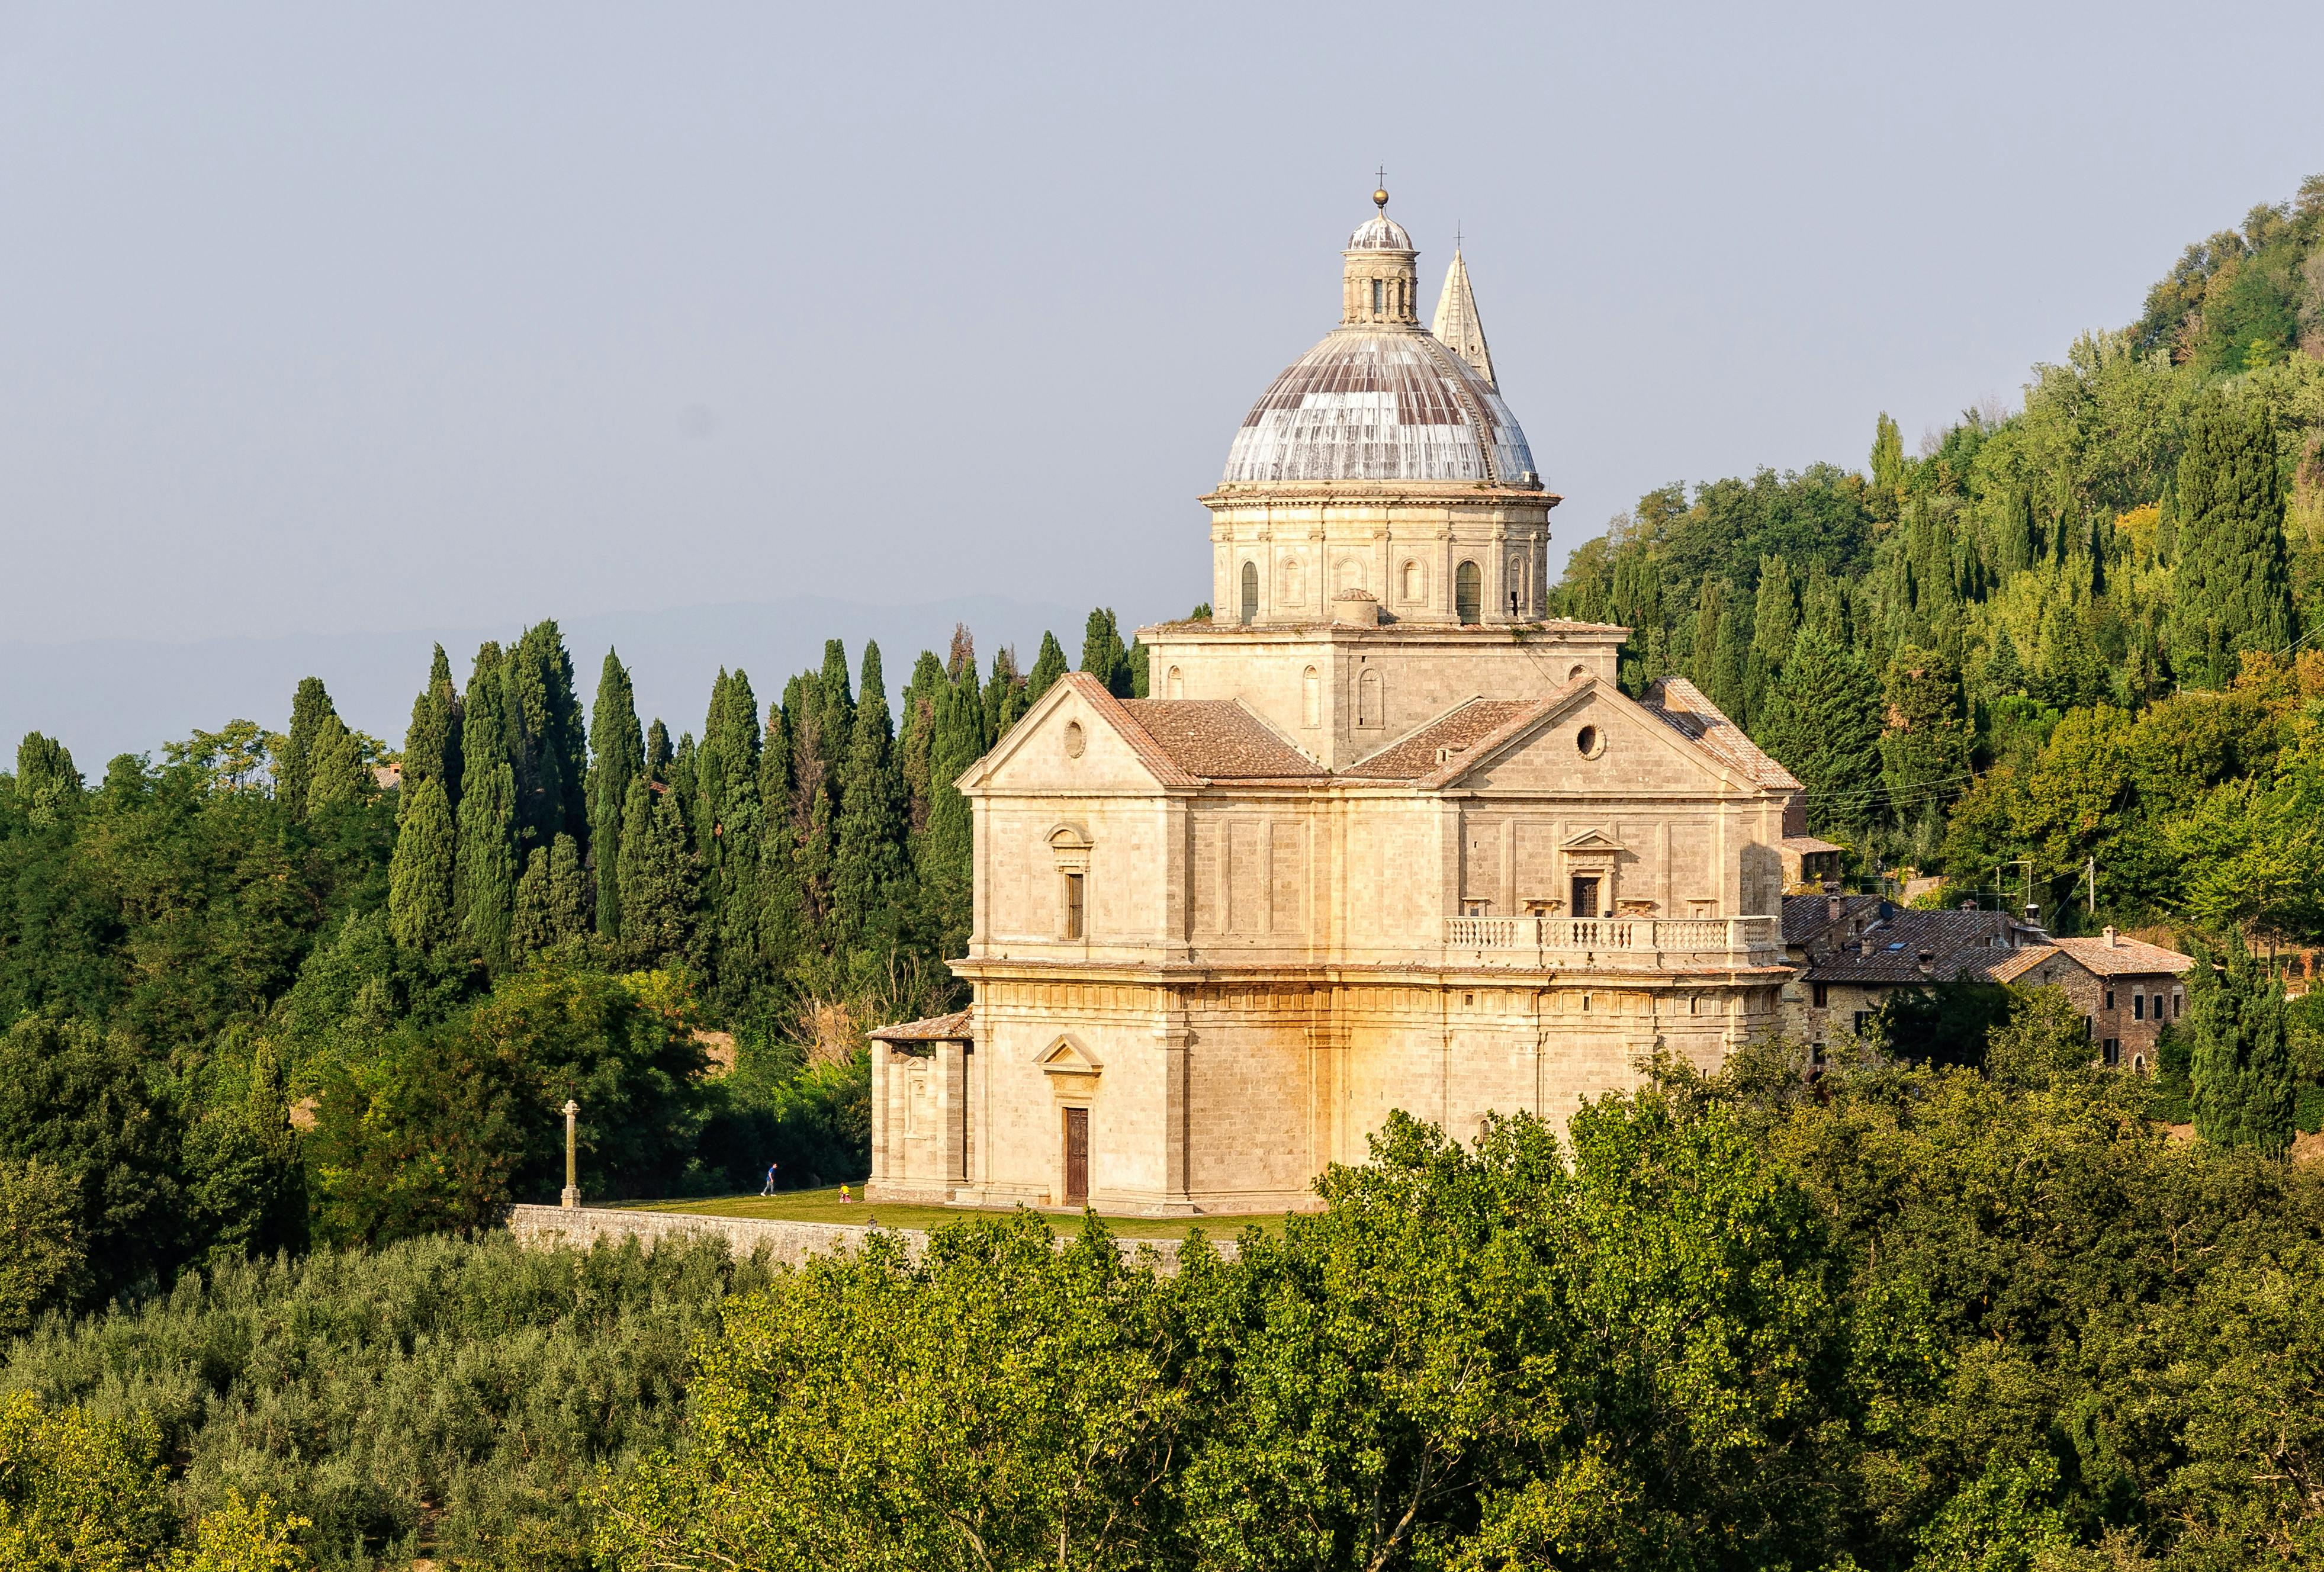 Tickets to the Temple of San Biagio in Montepulciano